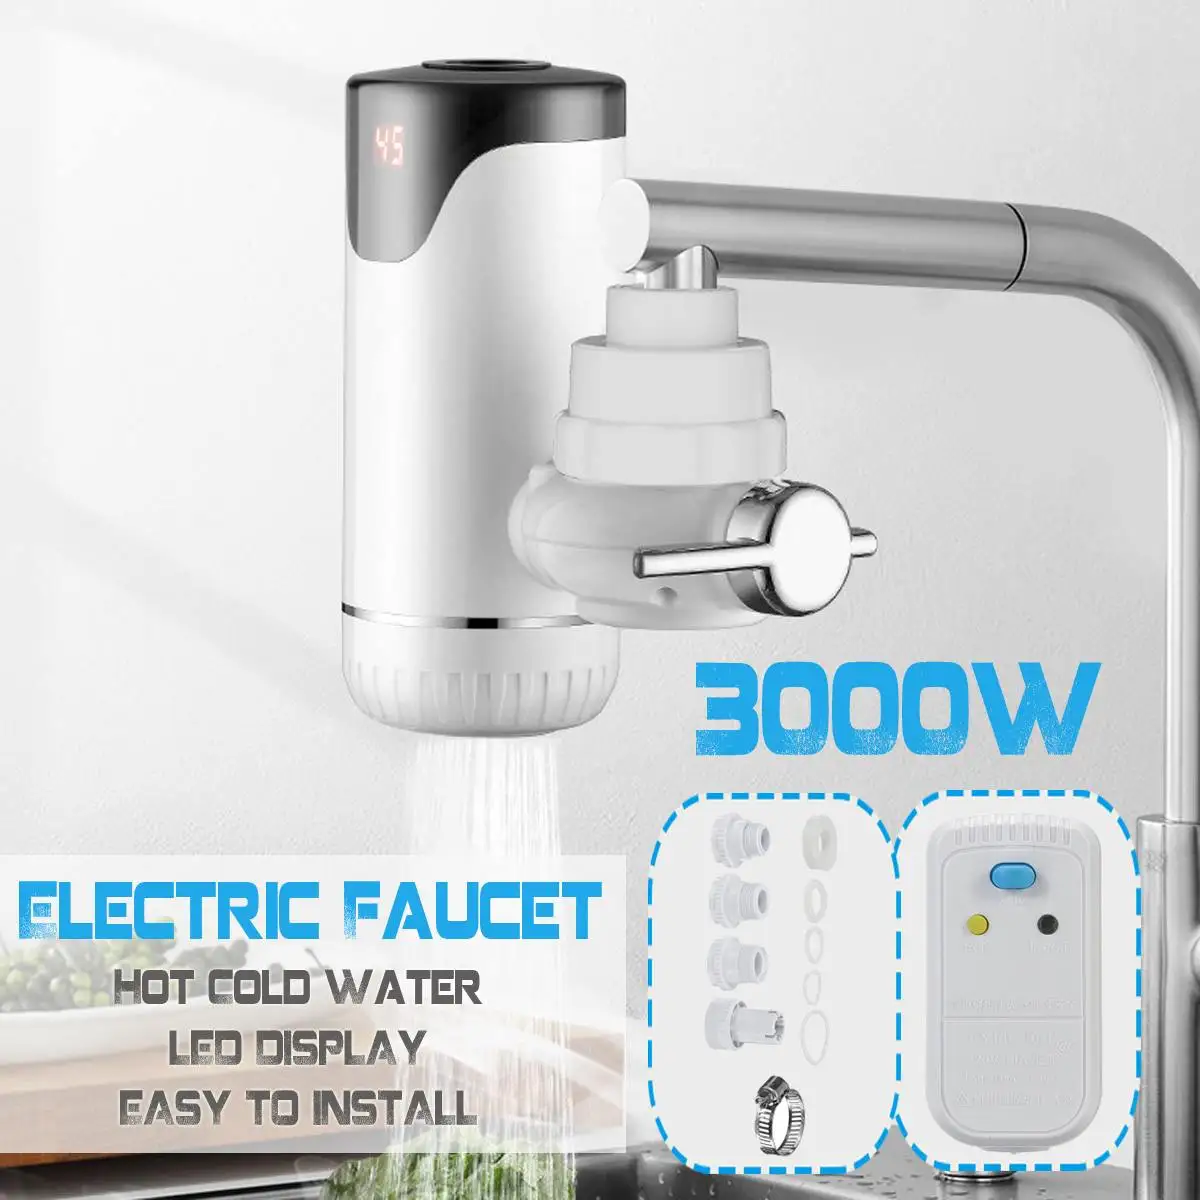 3000W Electric Water Heater Tap Instant Hot Water Faucet LED Display Bathroom Kitchen Sink Faucet Cold/Hot Water Faucet Heater